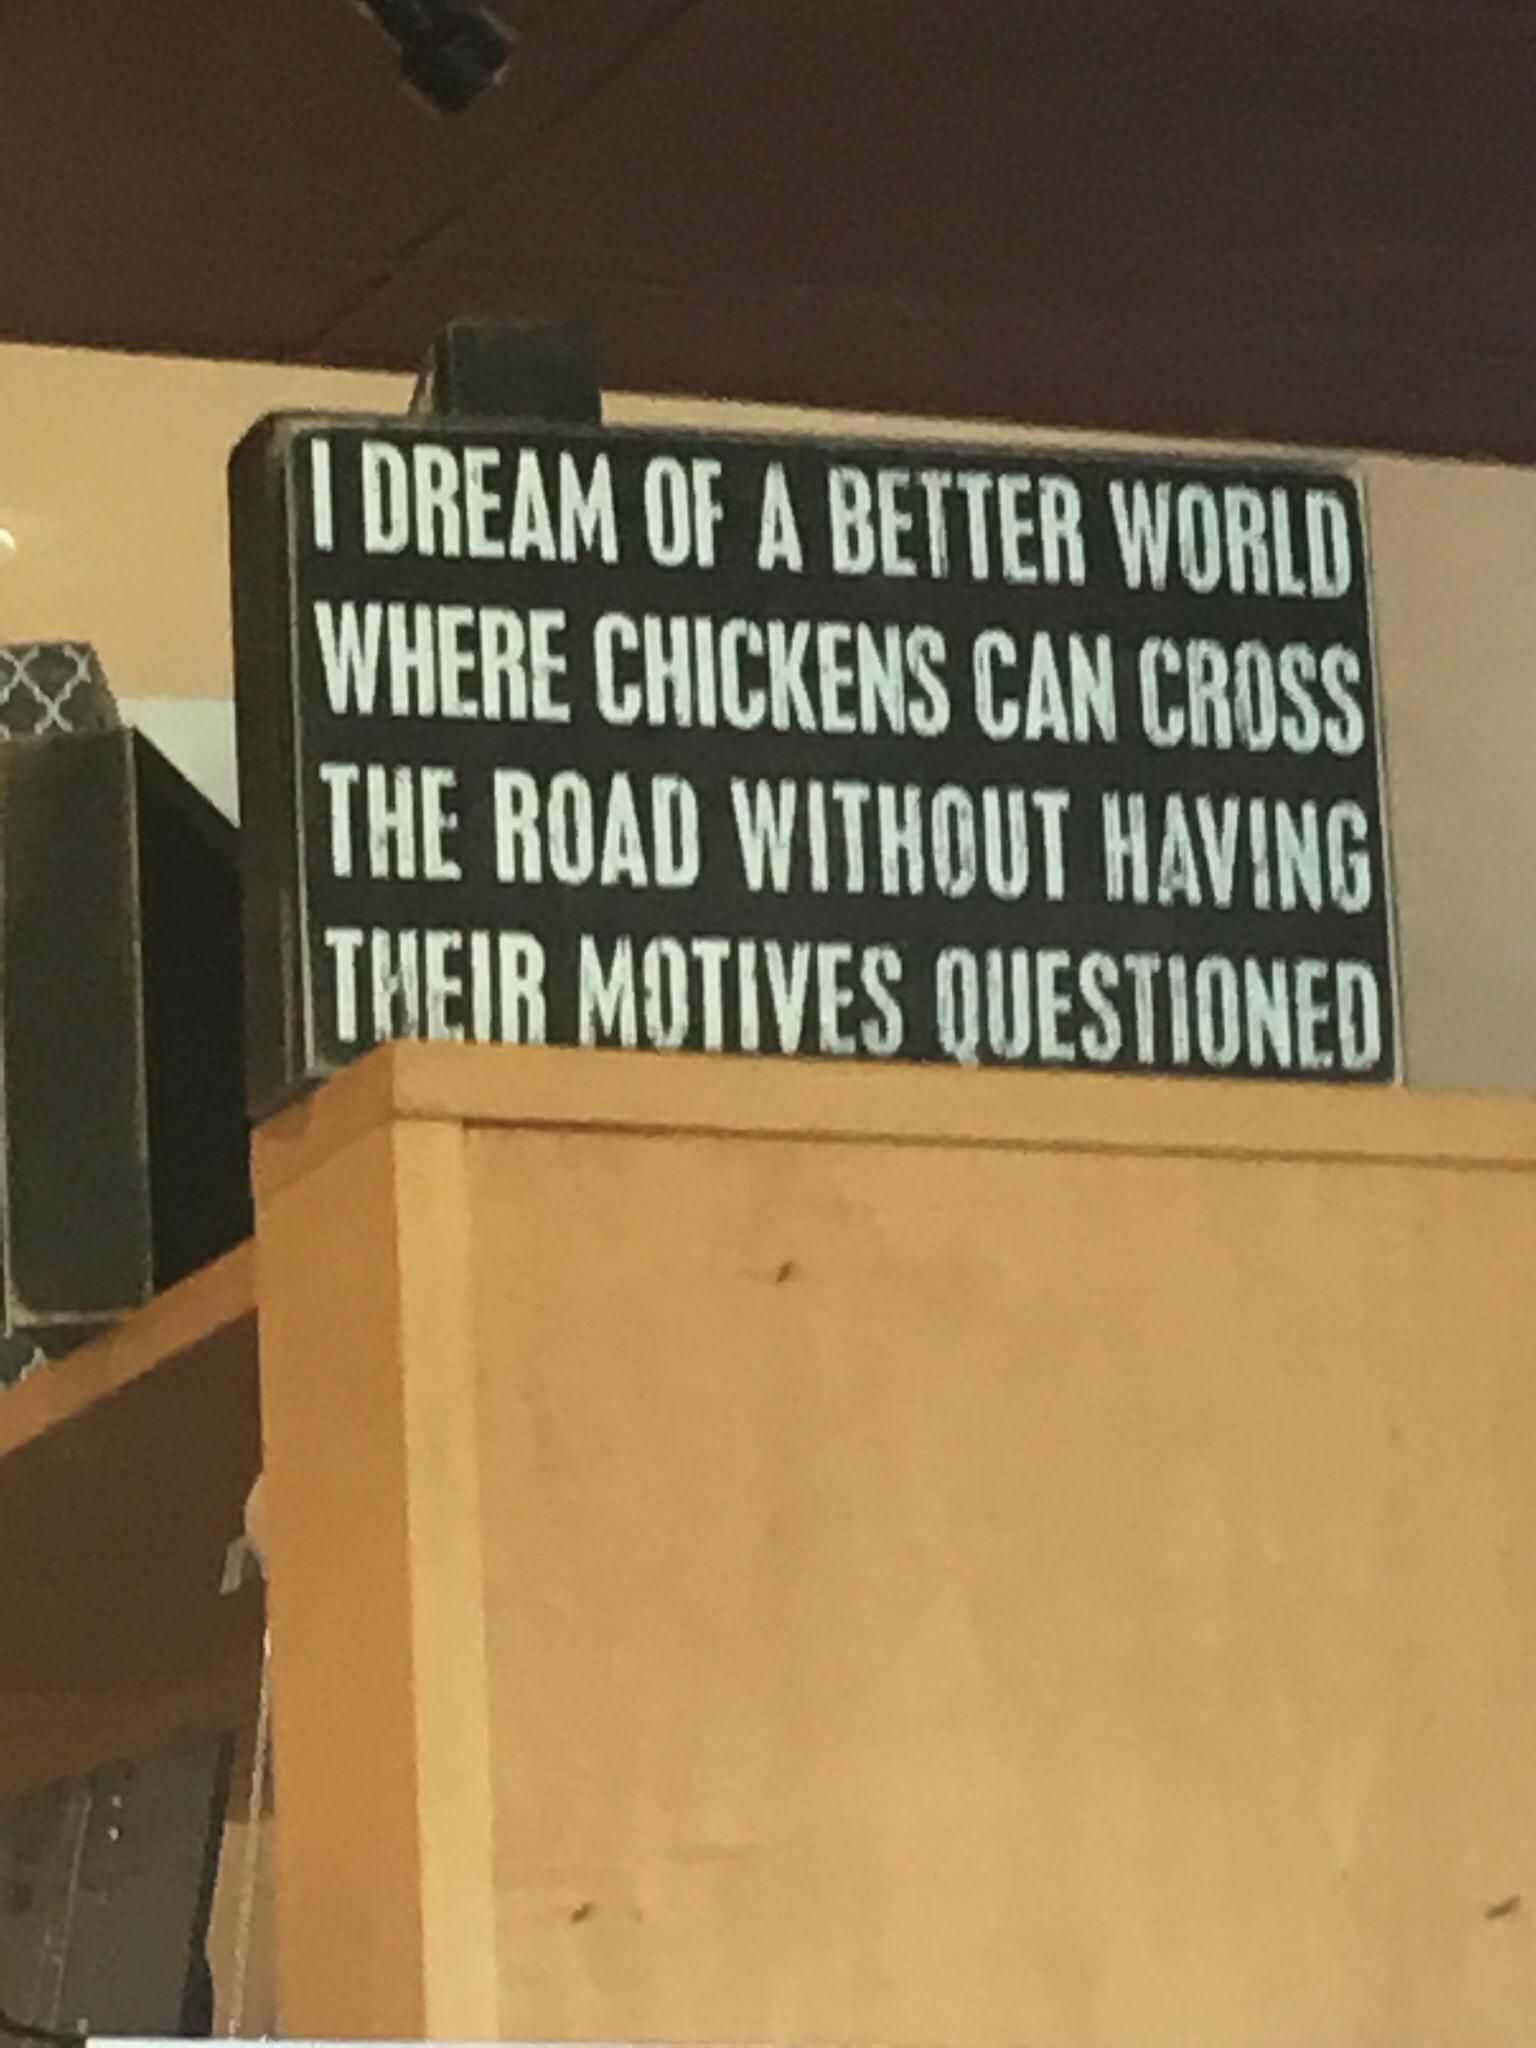 Saw this at my local coffee shop